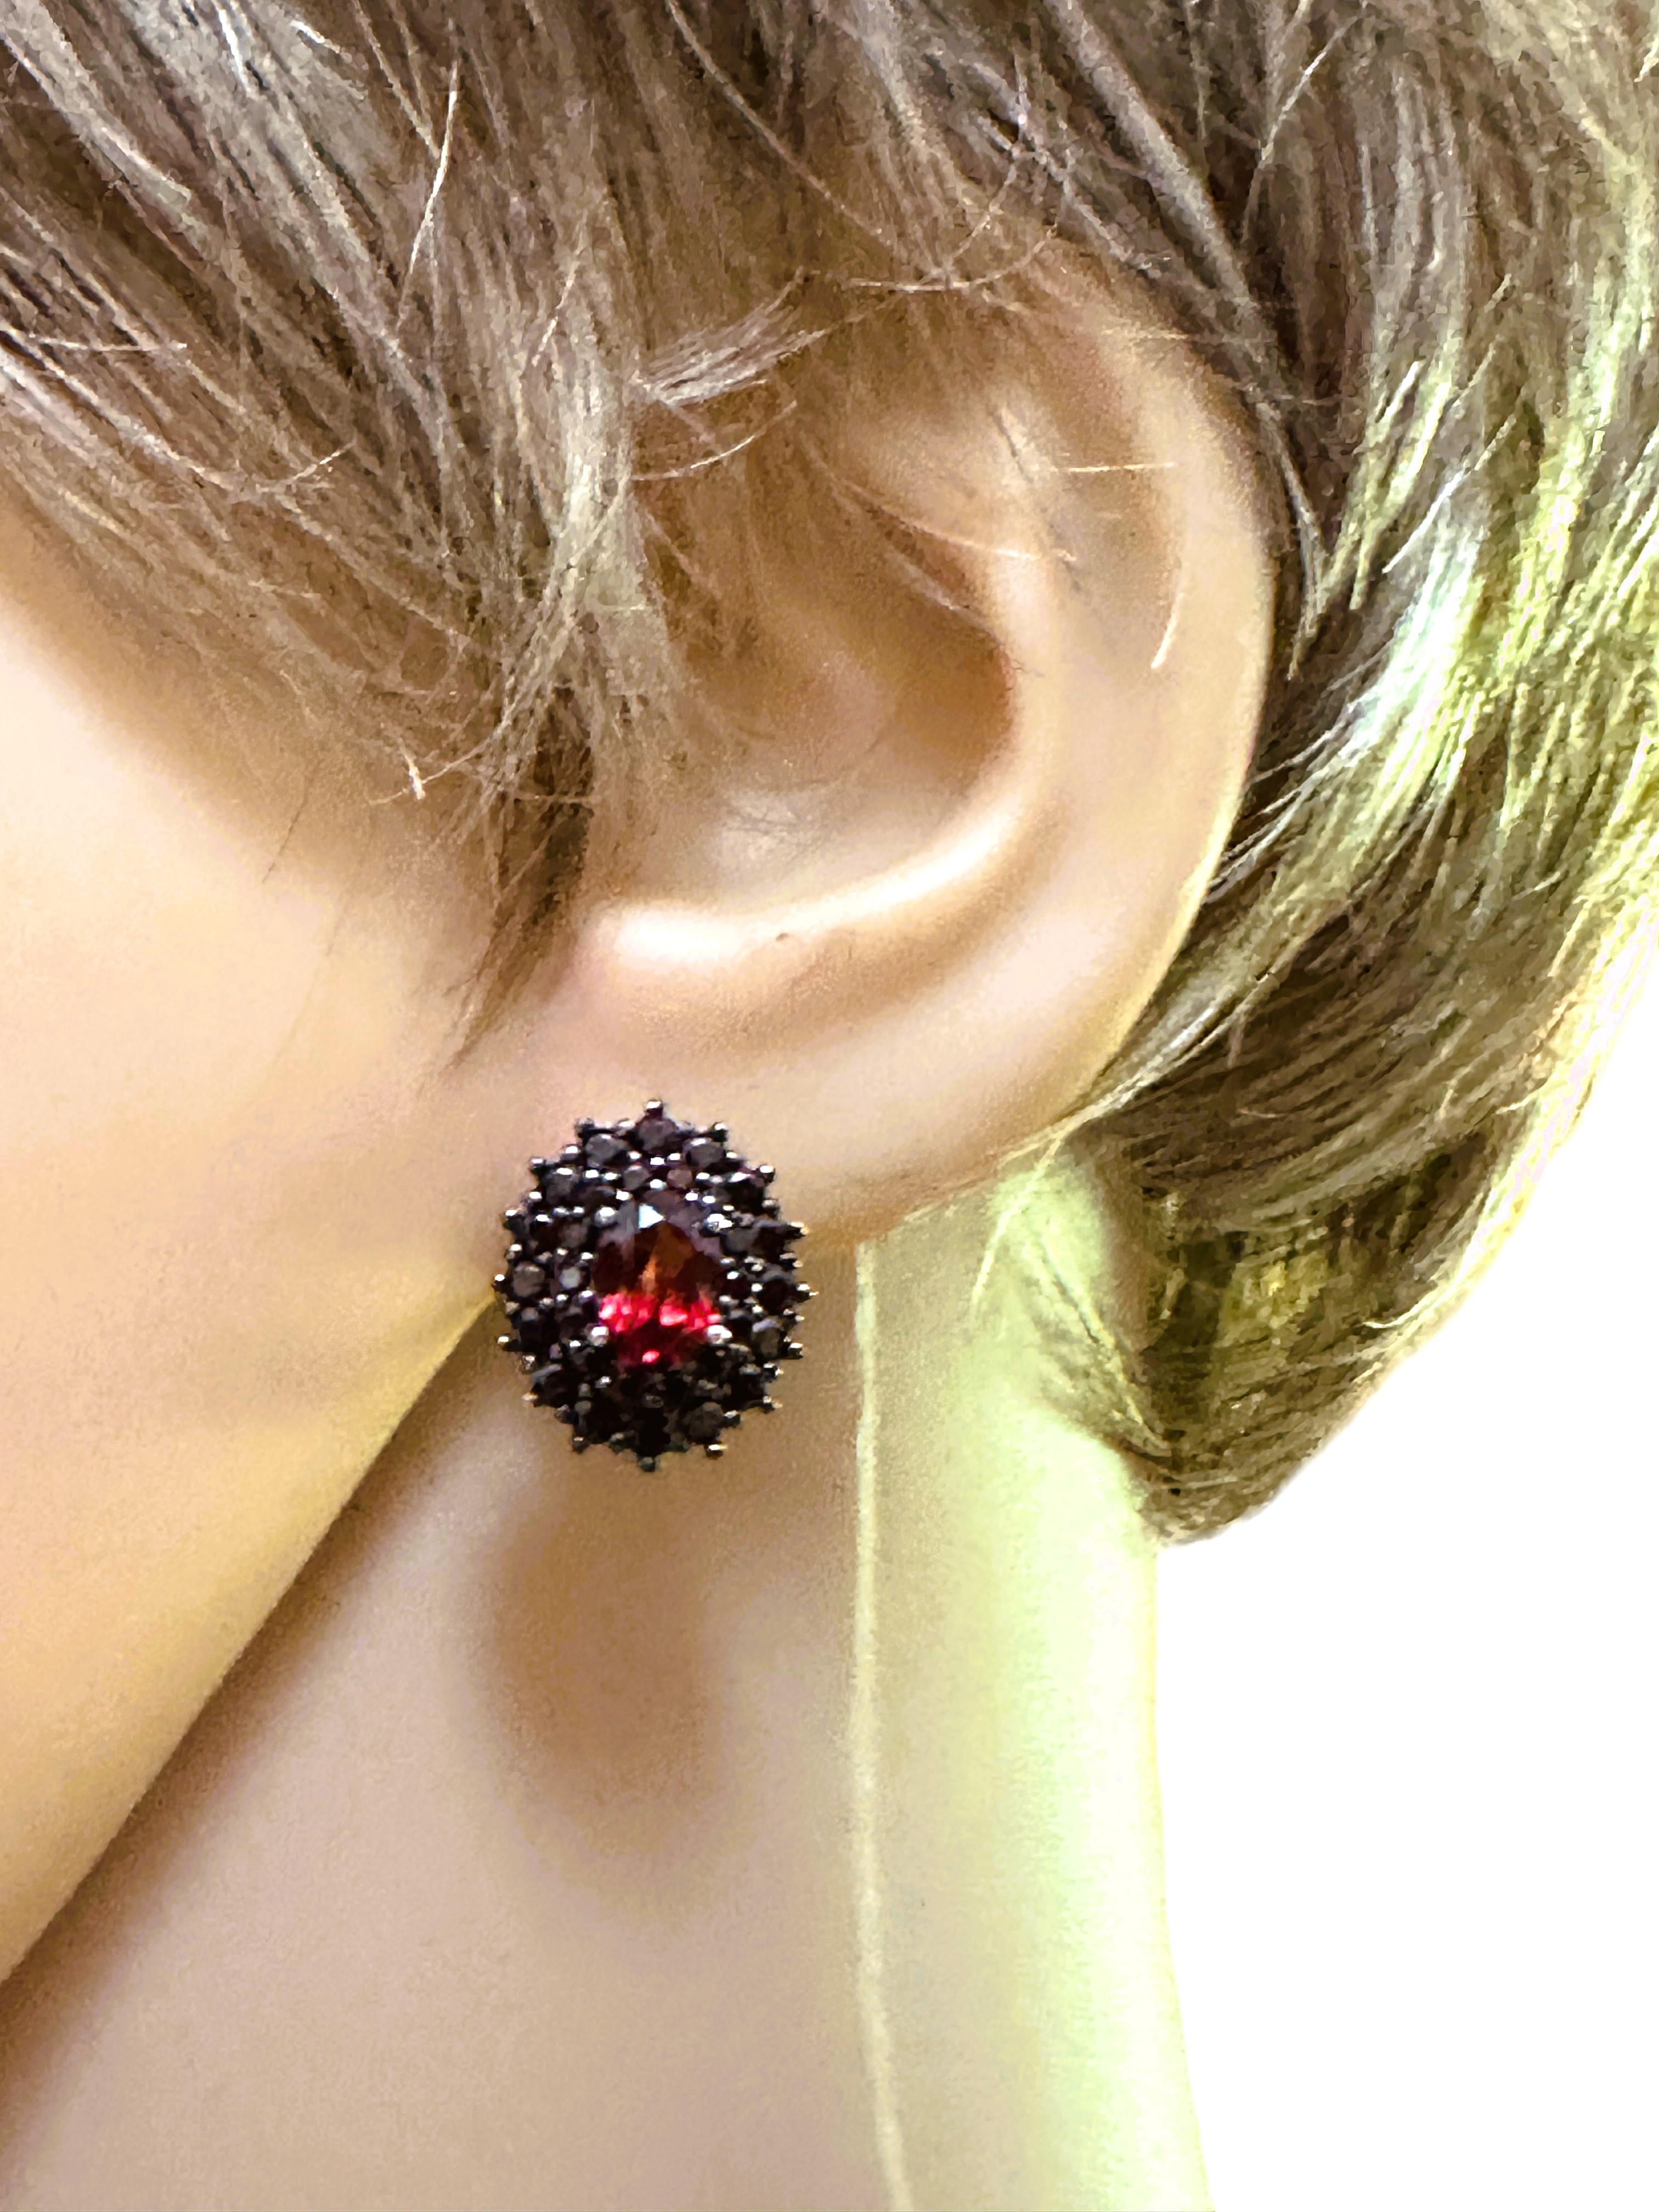  New African .76 Carat Mozambique Red Garnet Sterling Earrings Pour femmes 